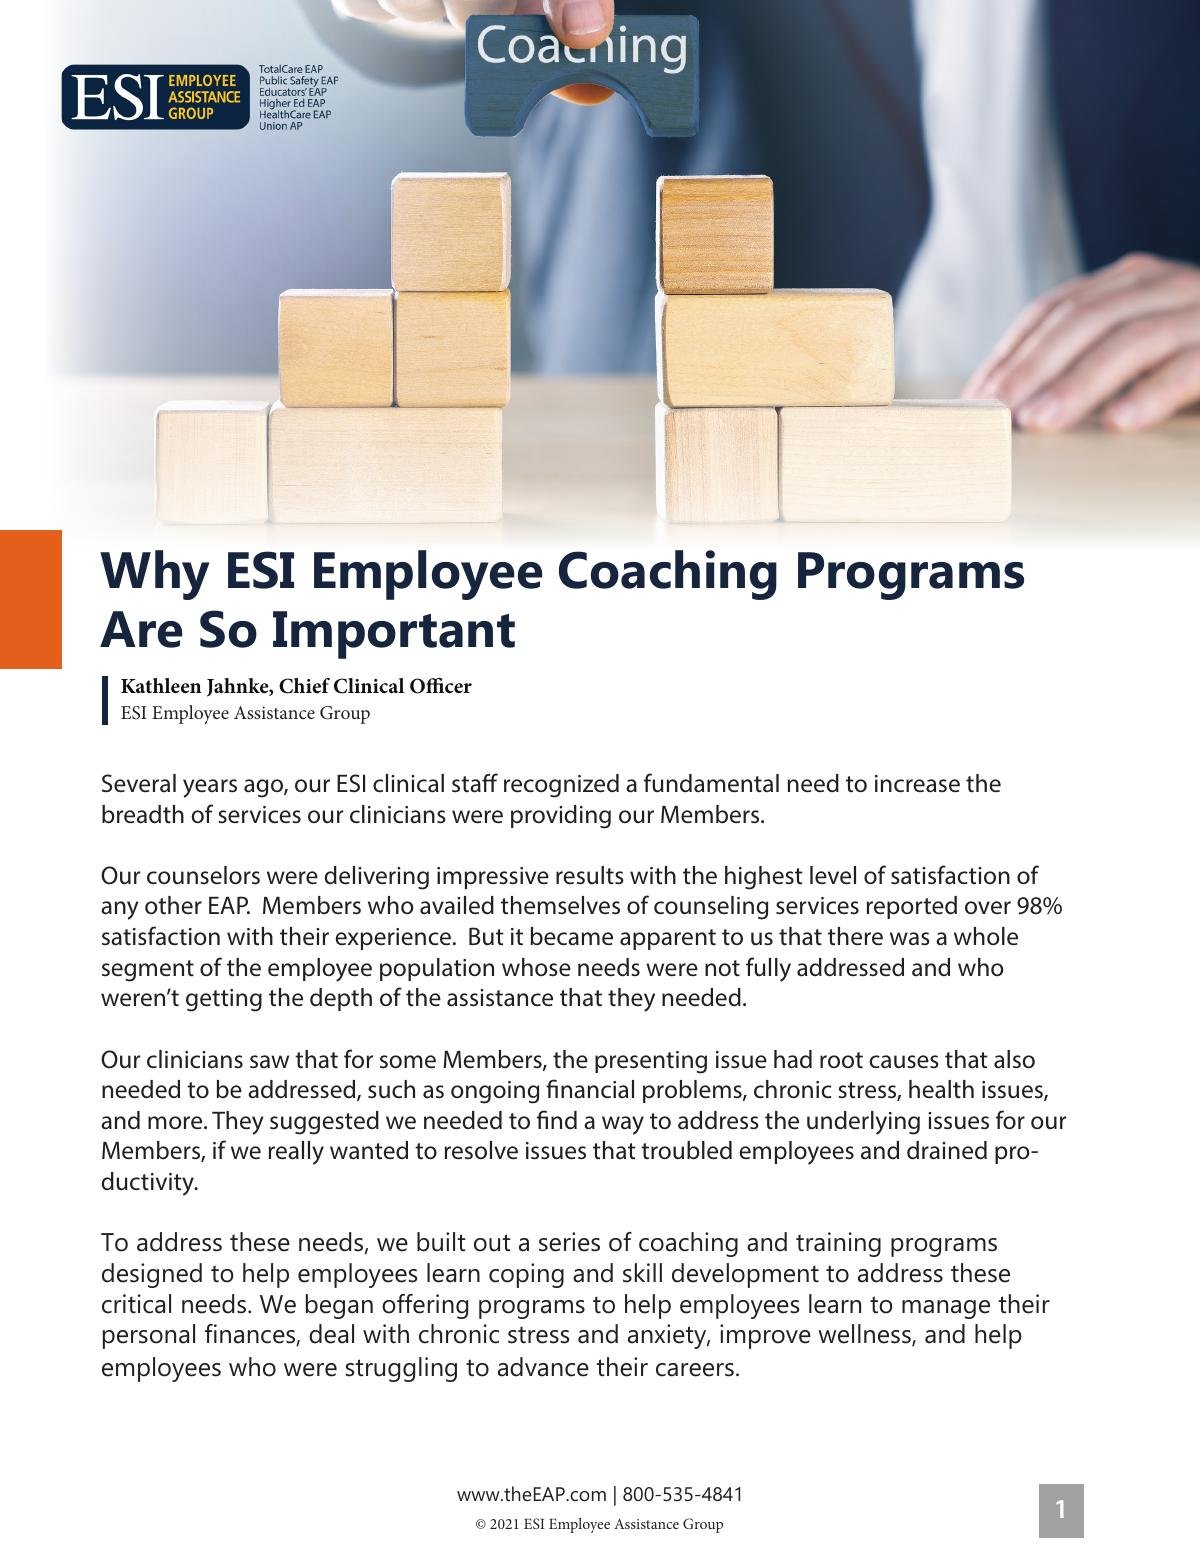 Why ESI Employee Coaching Programs Are So Important